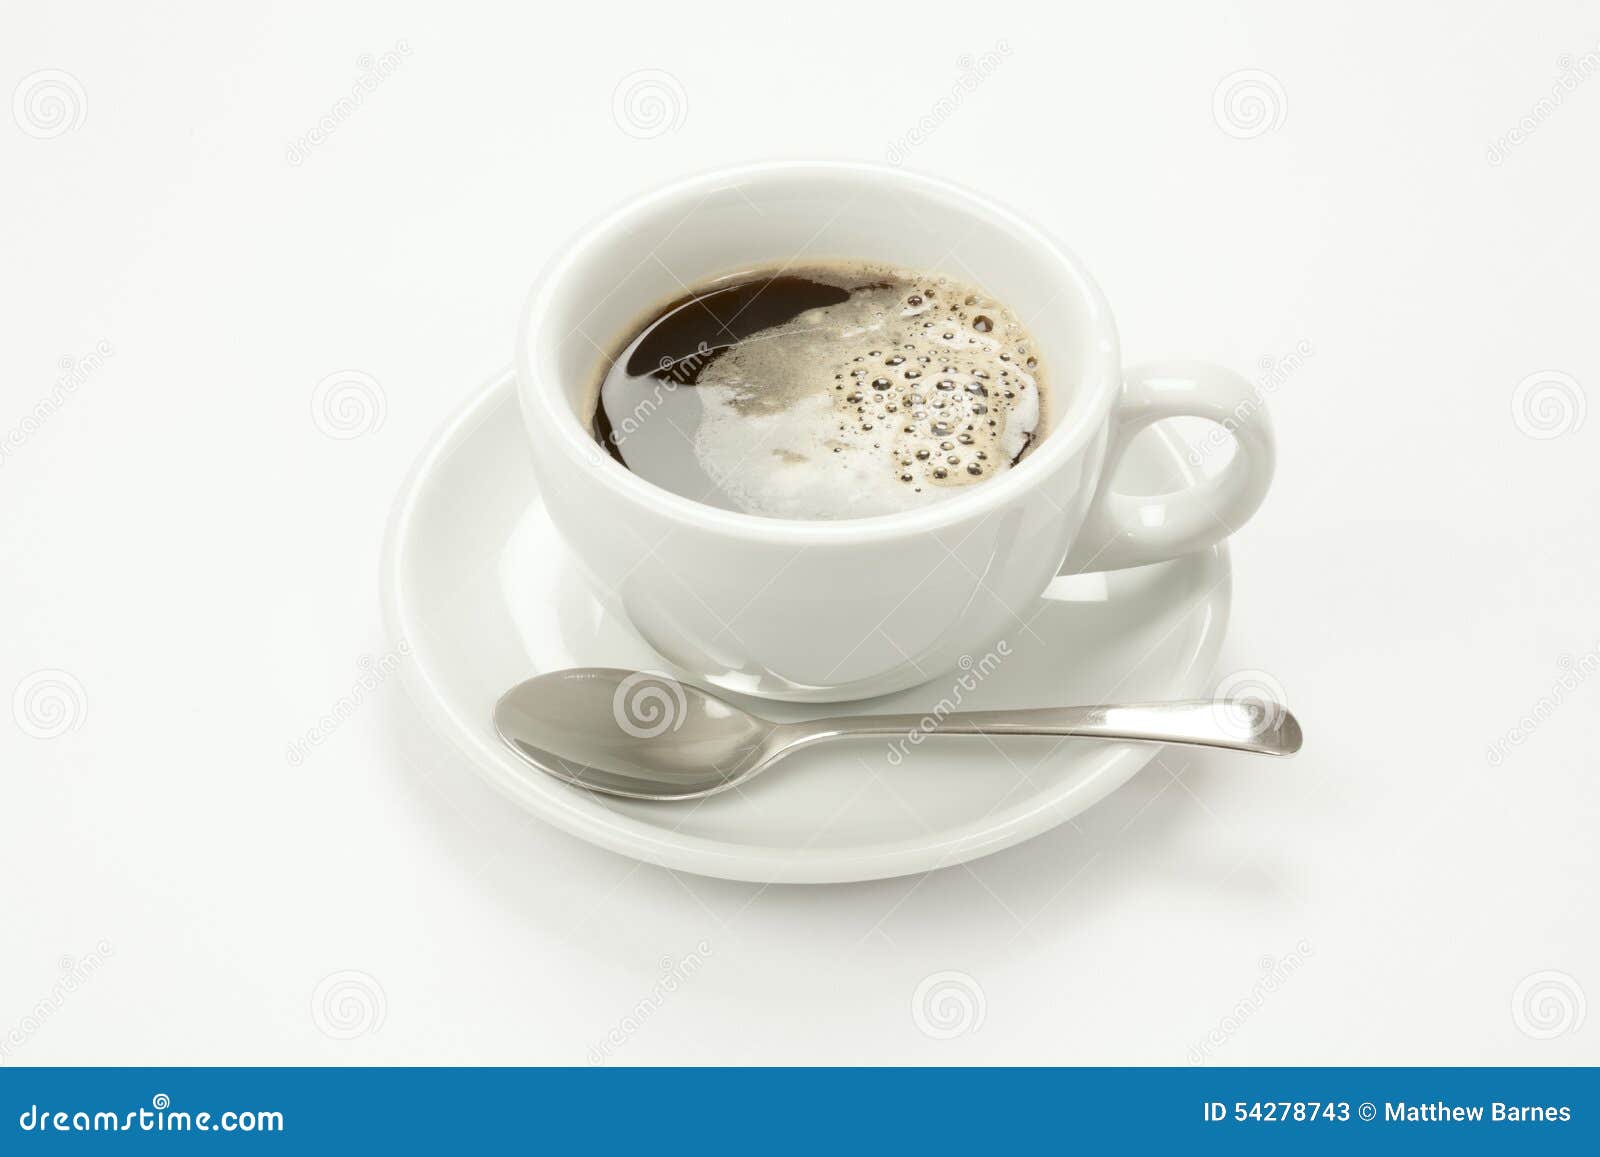 Black coffee in white cup stock image. Image of decafinated - 54278743